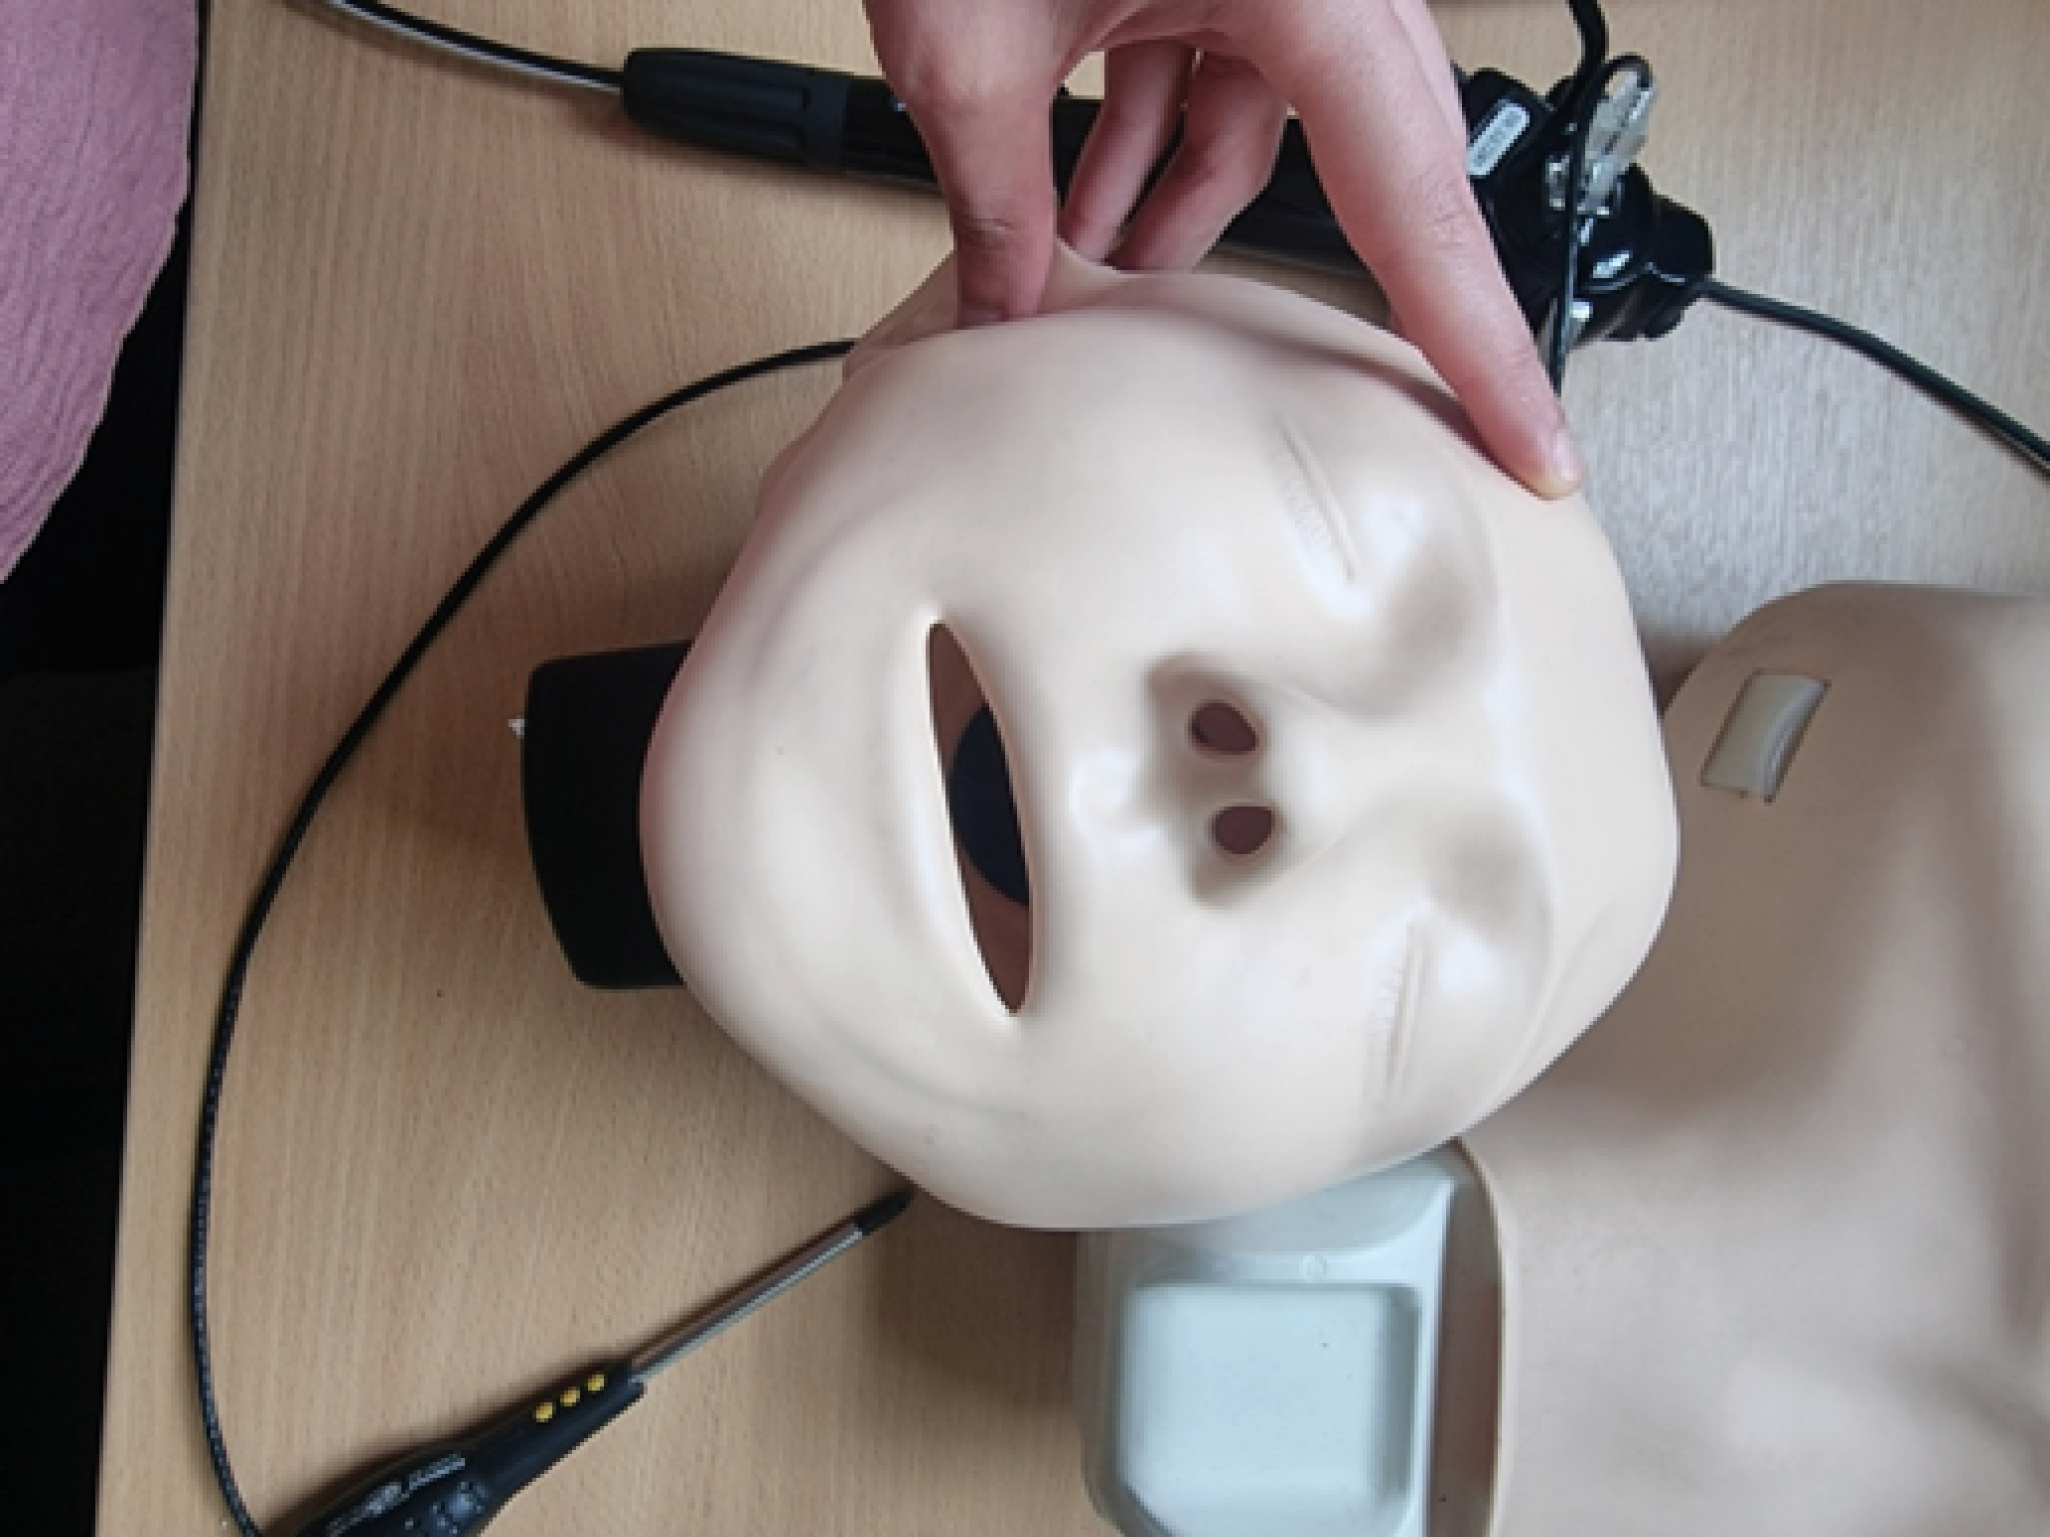 A basic resuscitation training manikin is used. The silicone/rubber skin is removed.